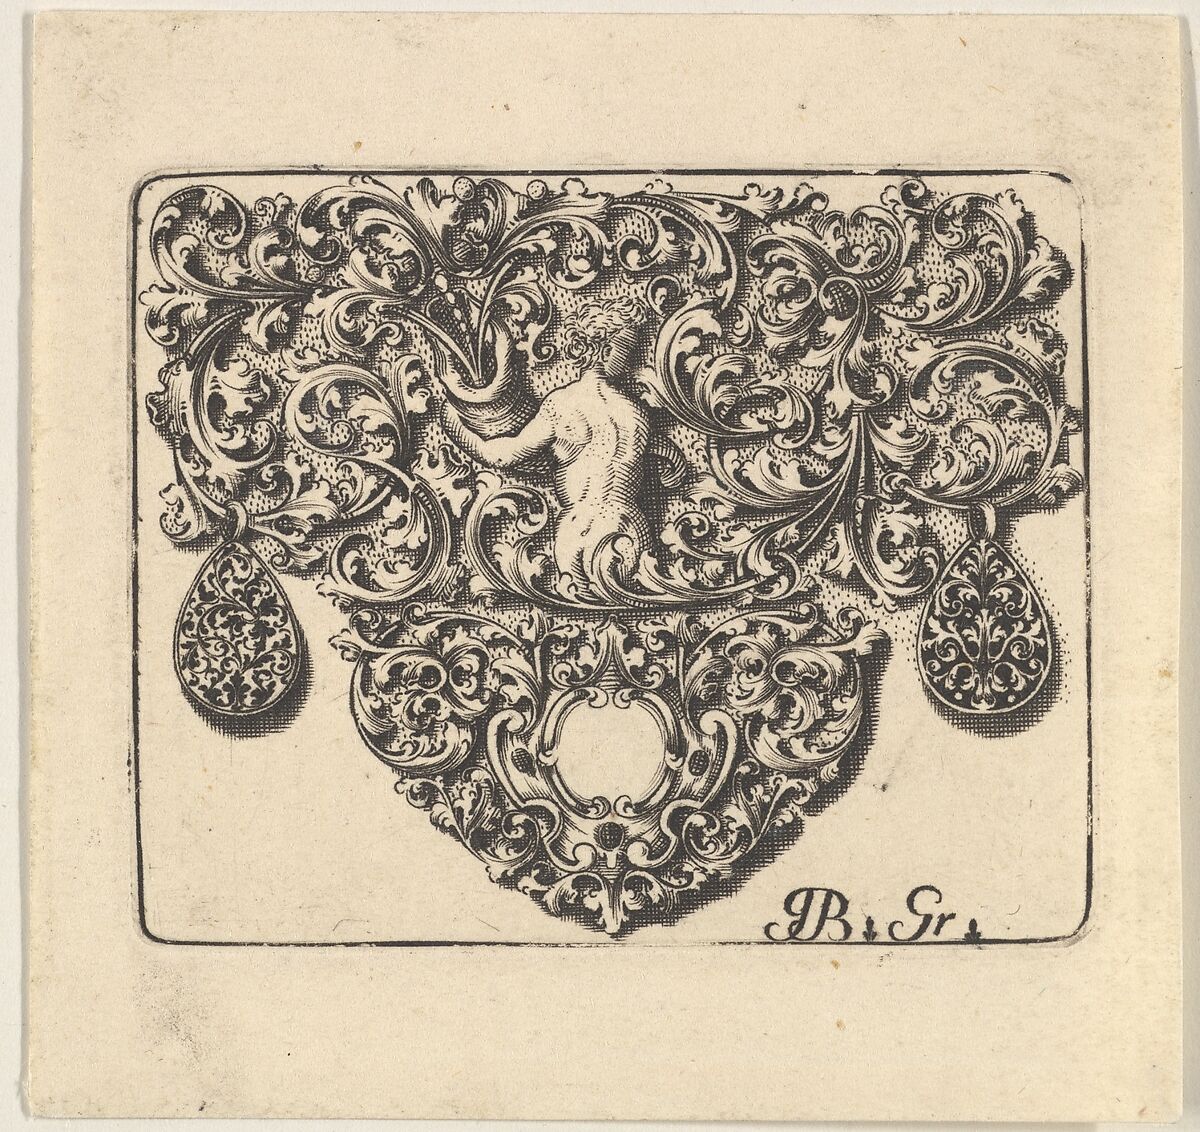 Goldsmiths Ornament with a Young Man Holding a Cornucopia, Giovani Battista Grondoni (Italian, active 1709–1715), Engraving and blackwork 